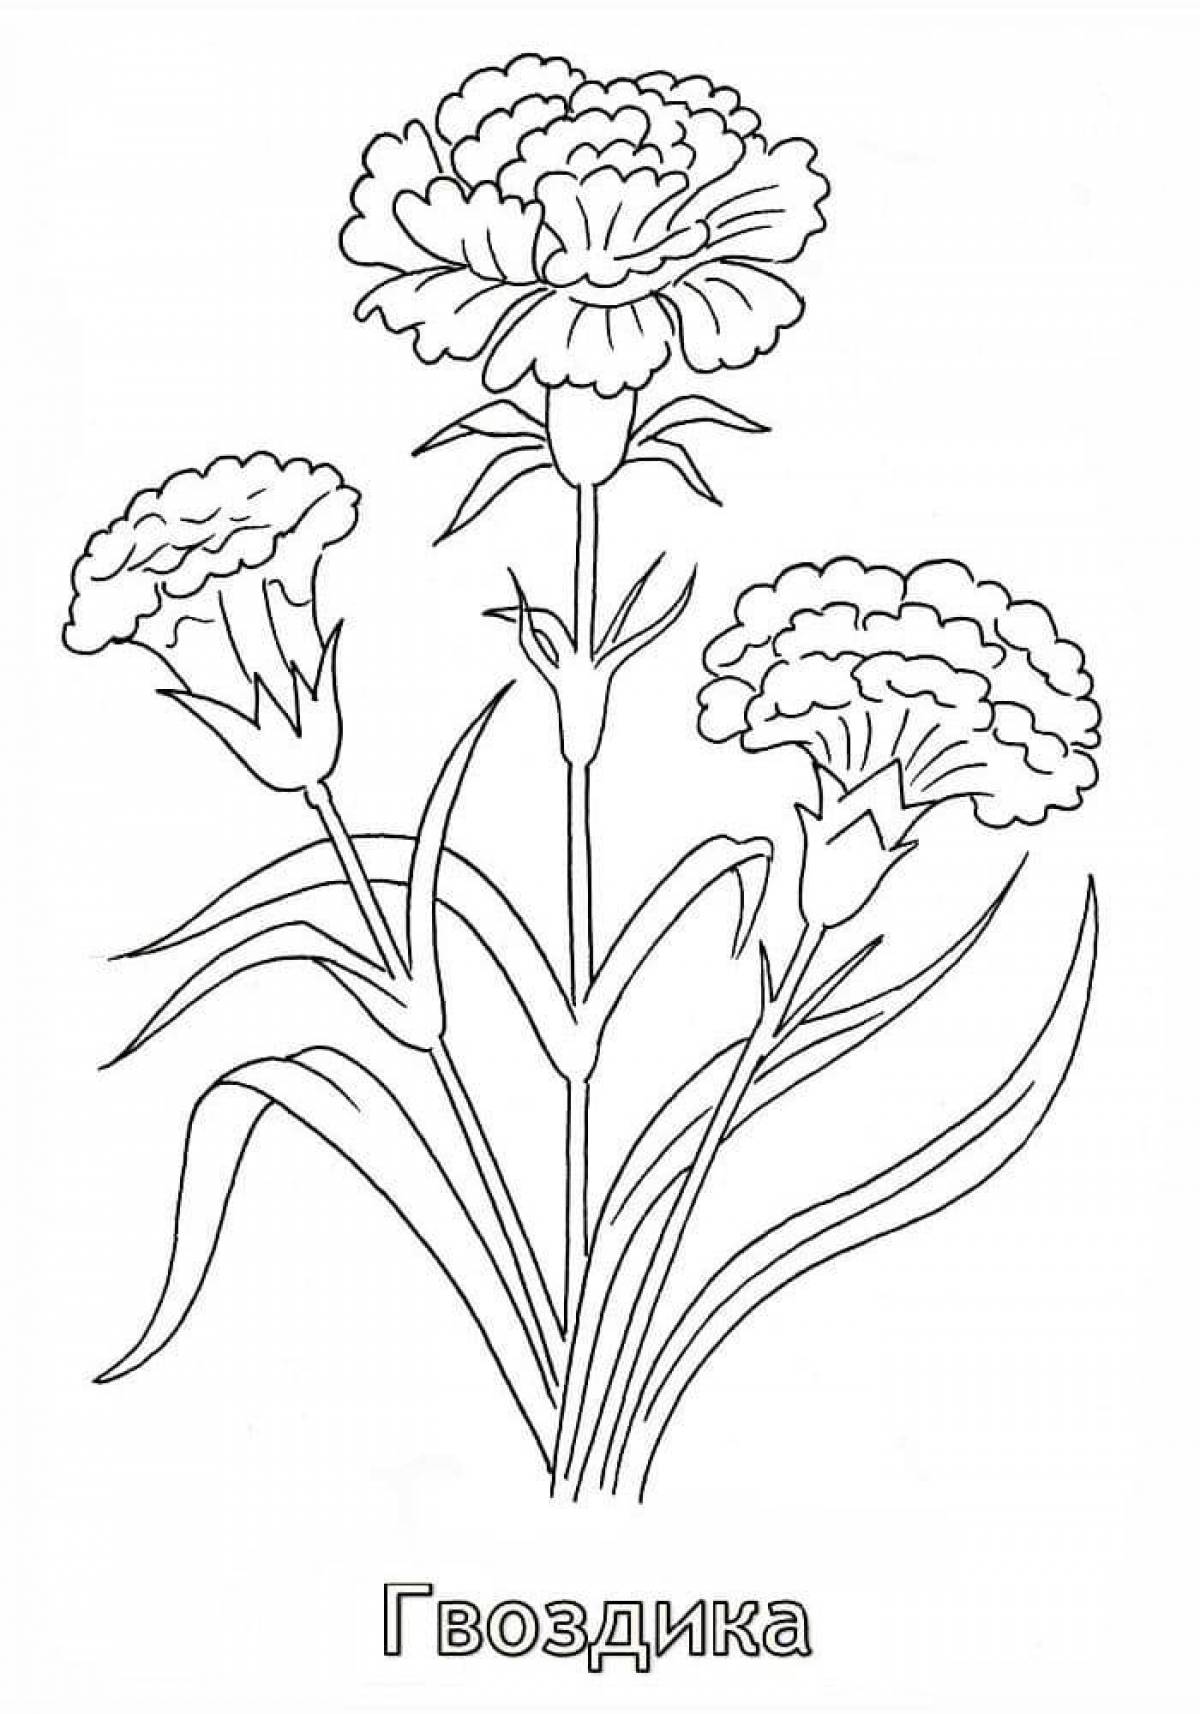 Fun carnation coloring for students